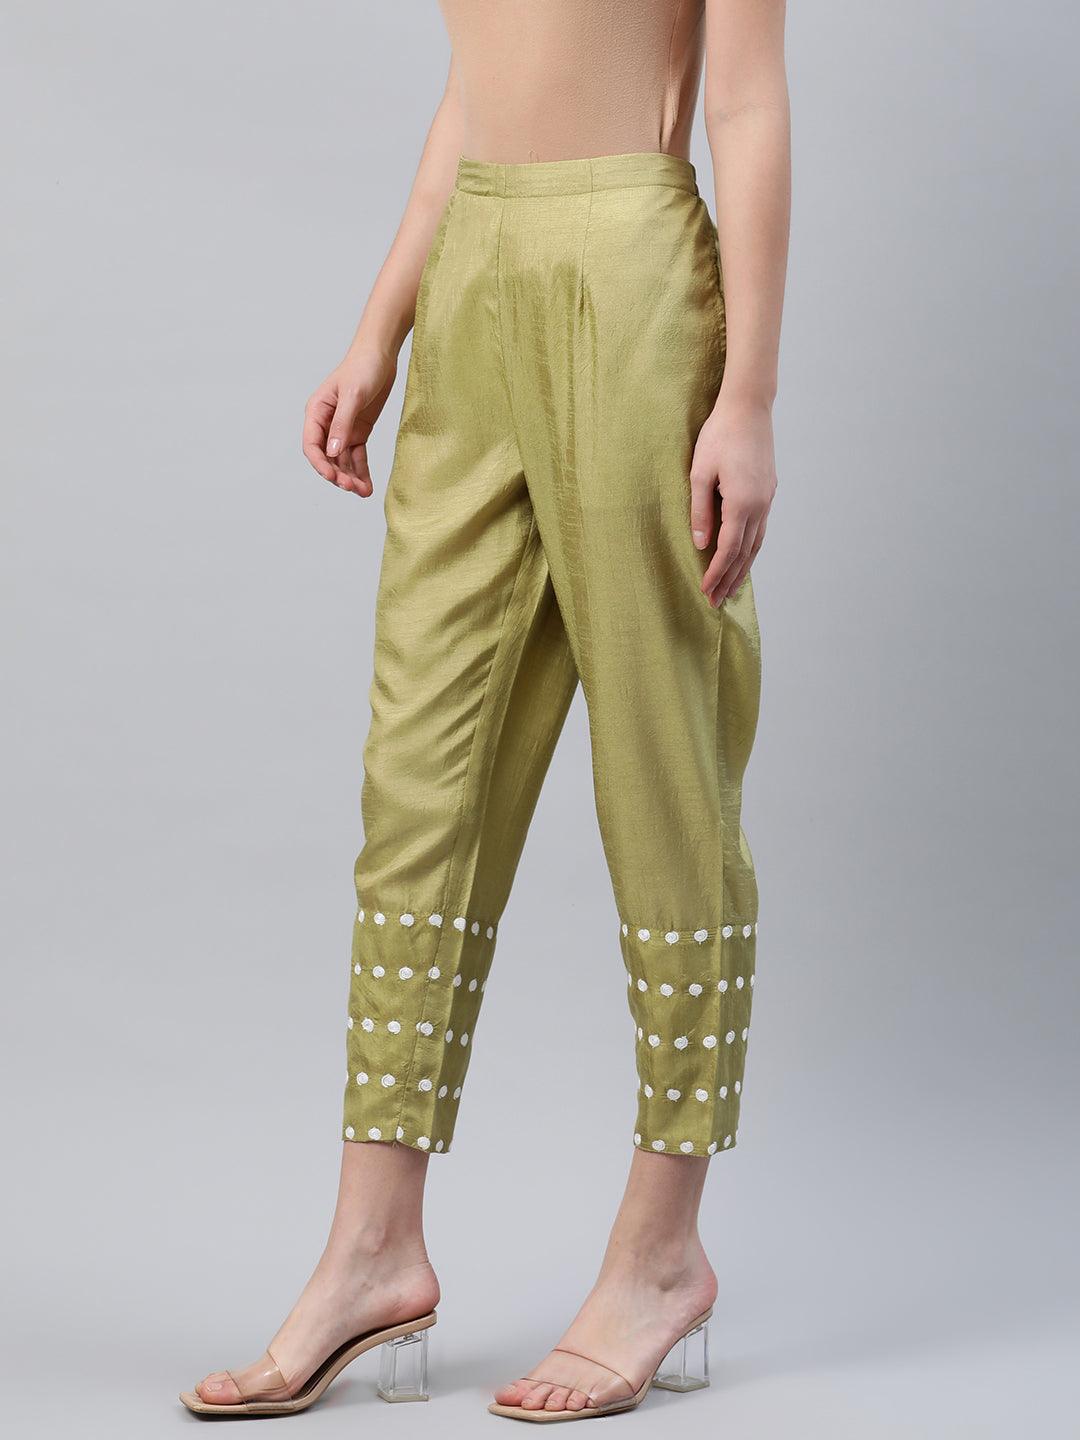 Green Embroidered Silk Trousers - Libas